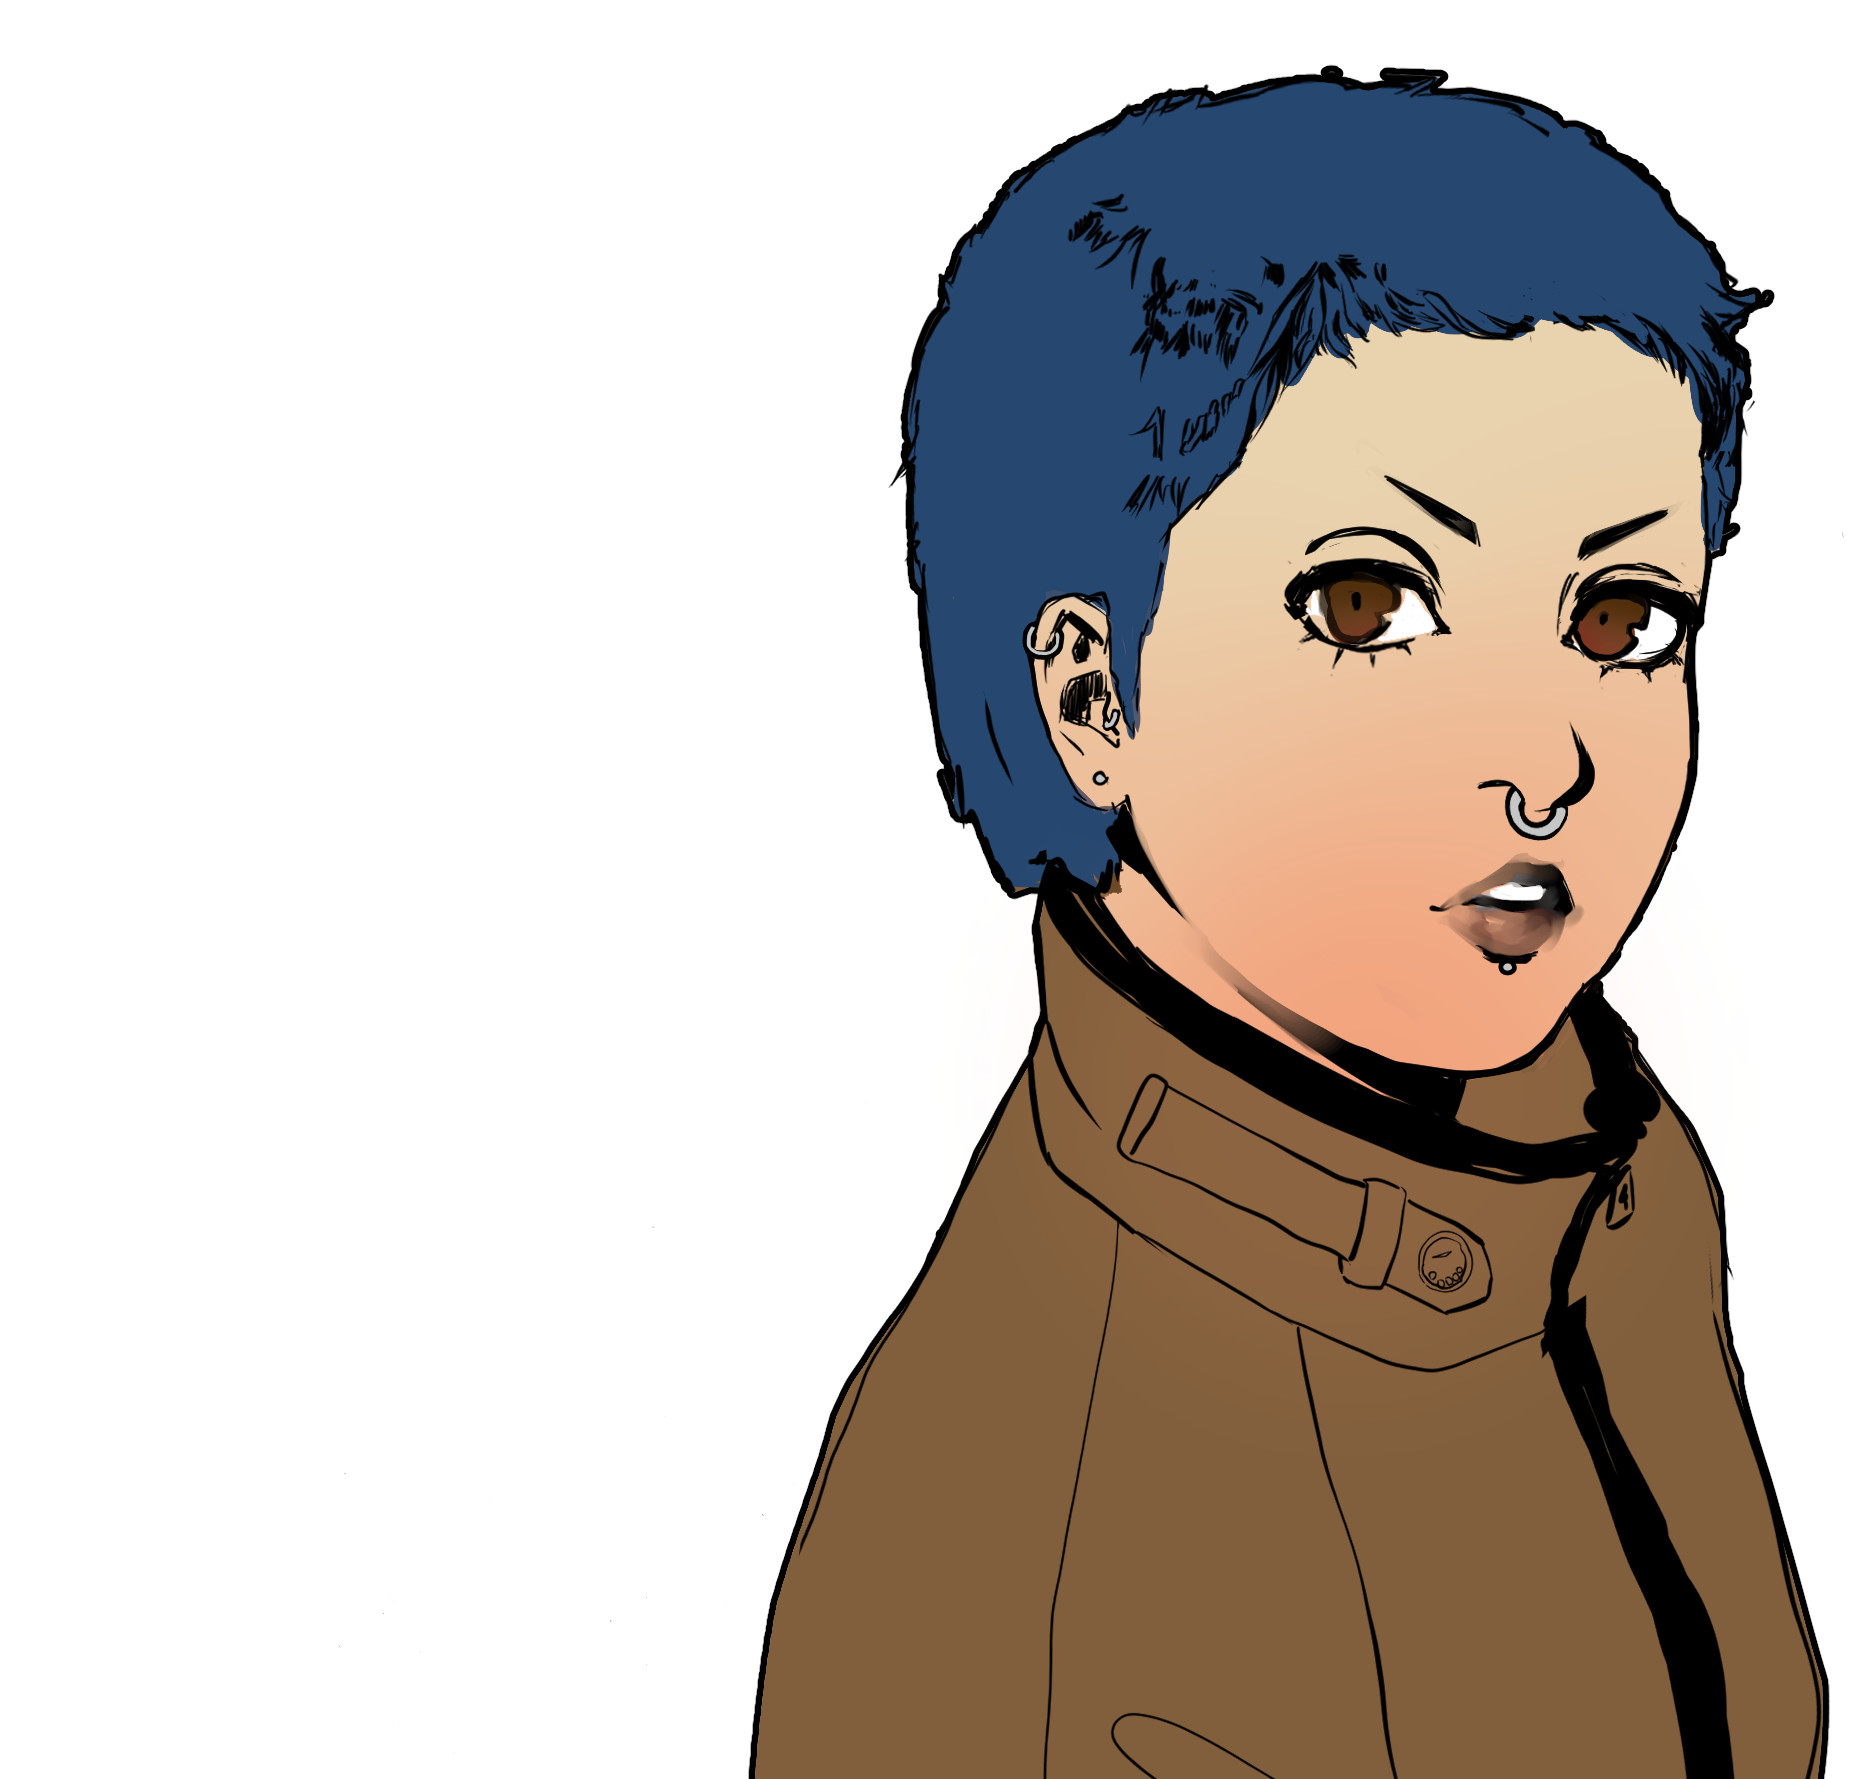 SwiftRed drawn in the Persona style, with blue hair